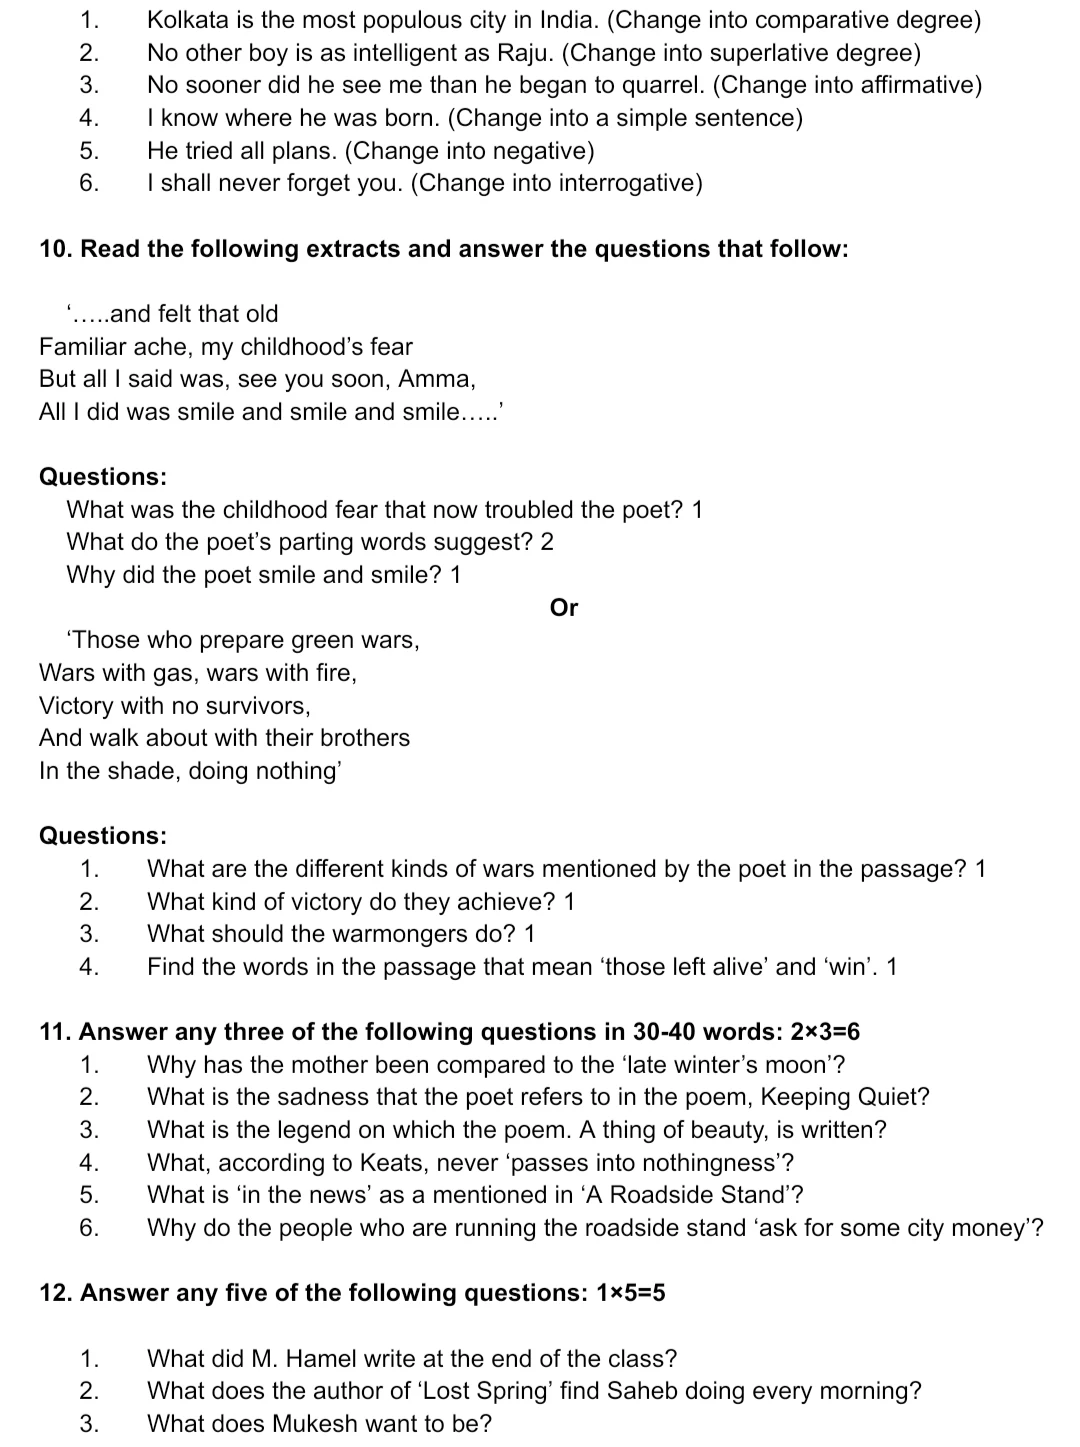 AHSEC Class 12 English Question paper'2015 | HS 2nd Year English Question paper '2015, Download Assam Class 12 English Question paper 2015,Hs 2nd year English Question paper